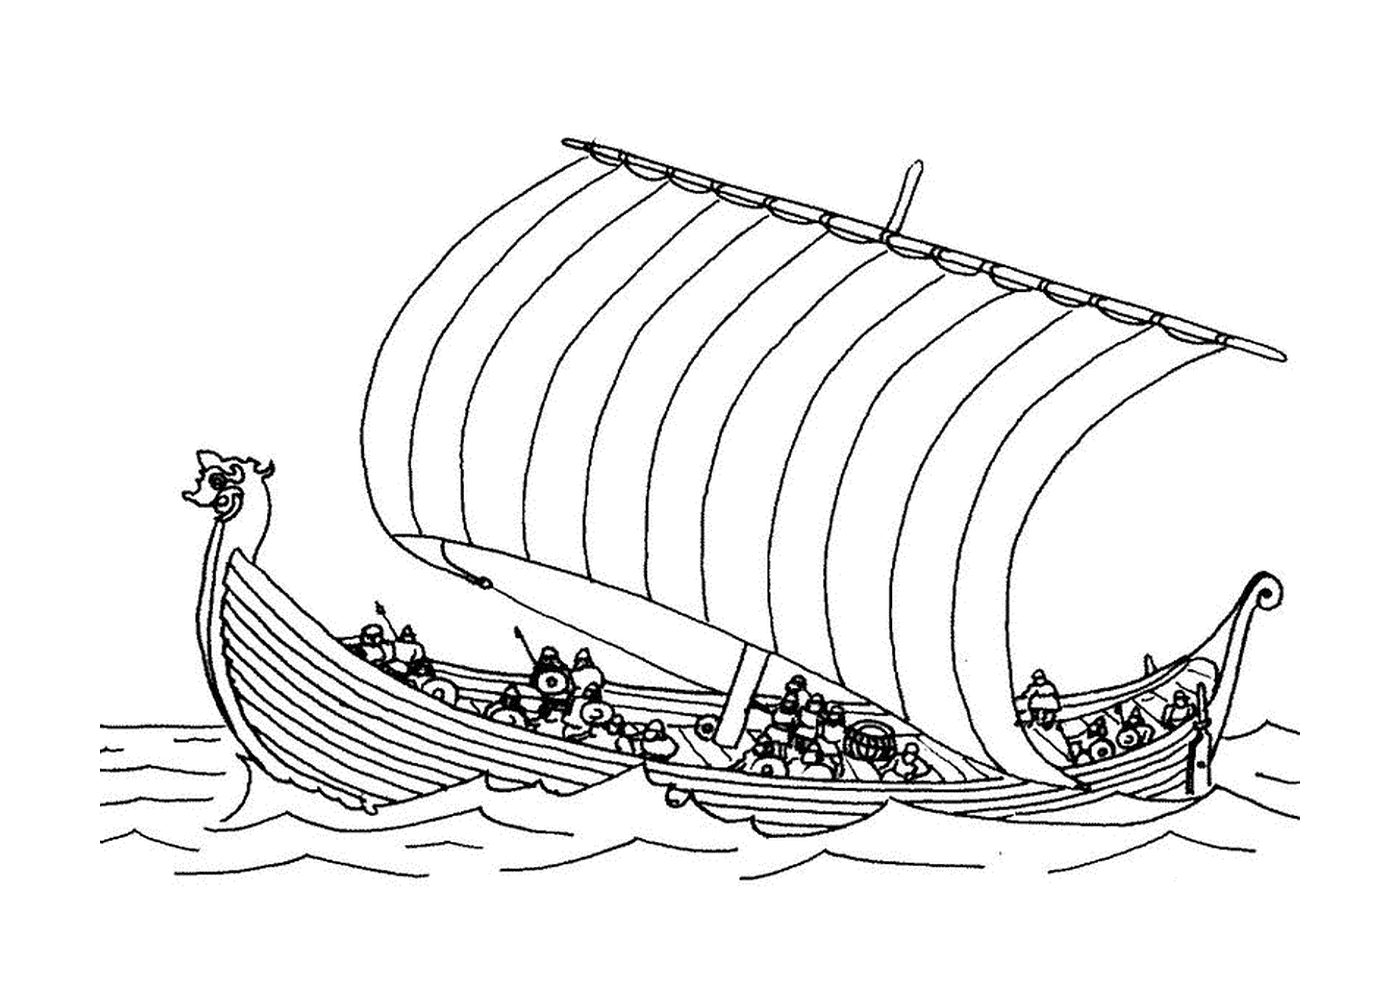  A drakkar boat on the water 